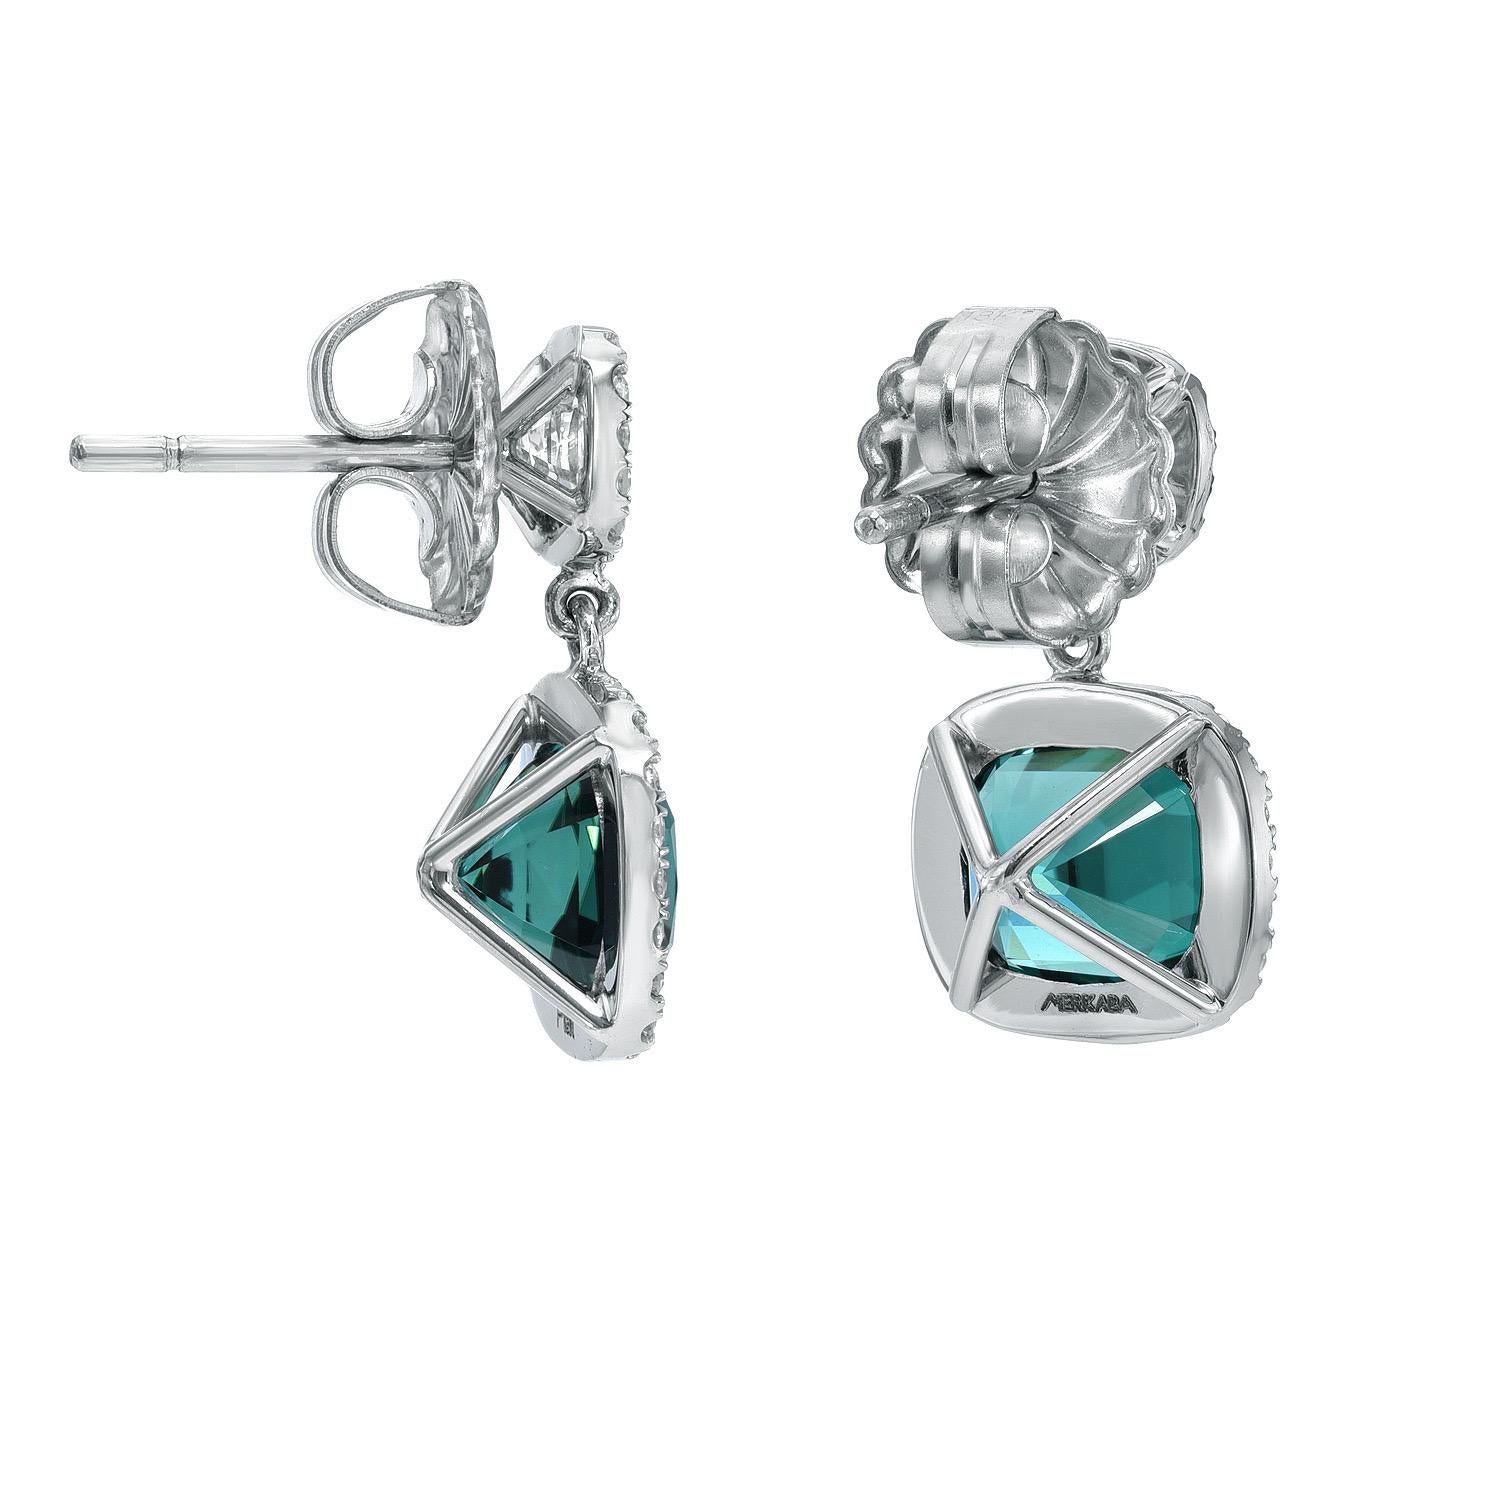 Exquisite platinum earrings, set with an exotic and desirable 4.61 carat pair of 